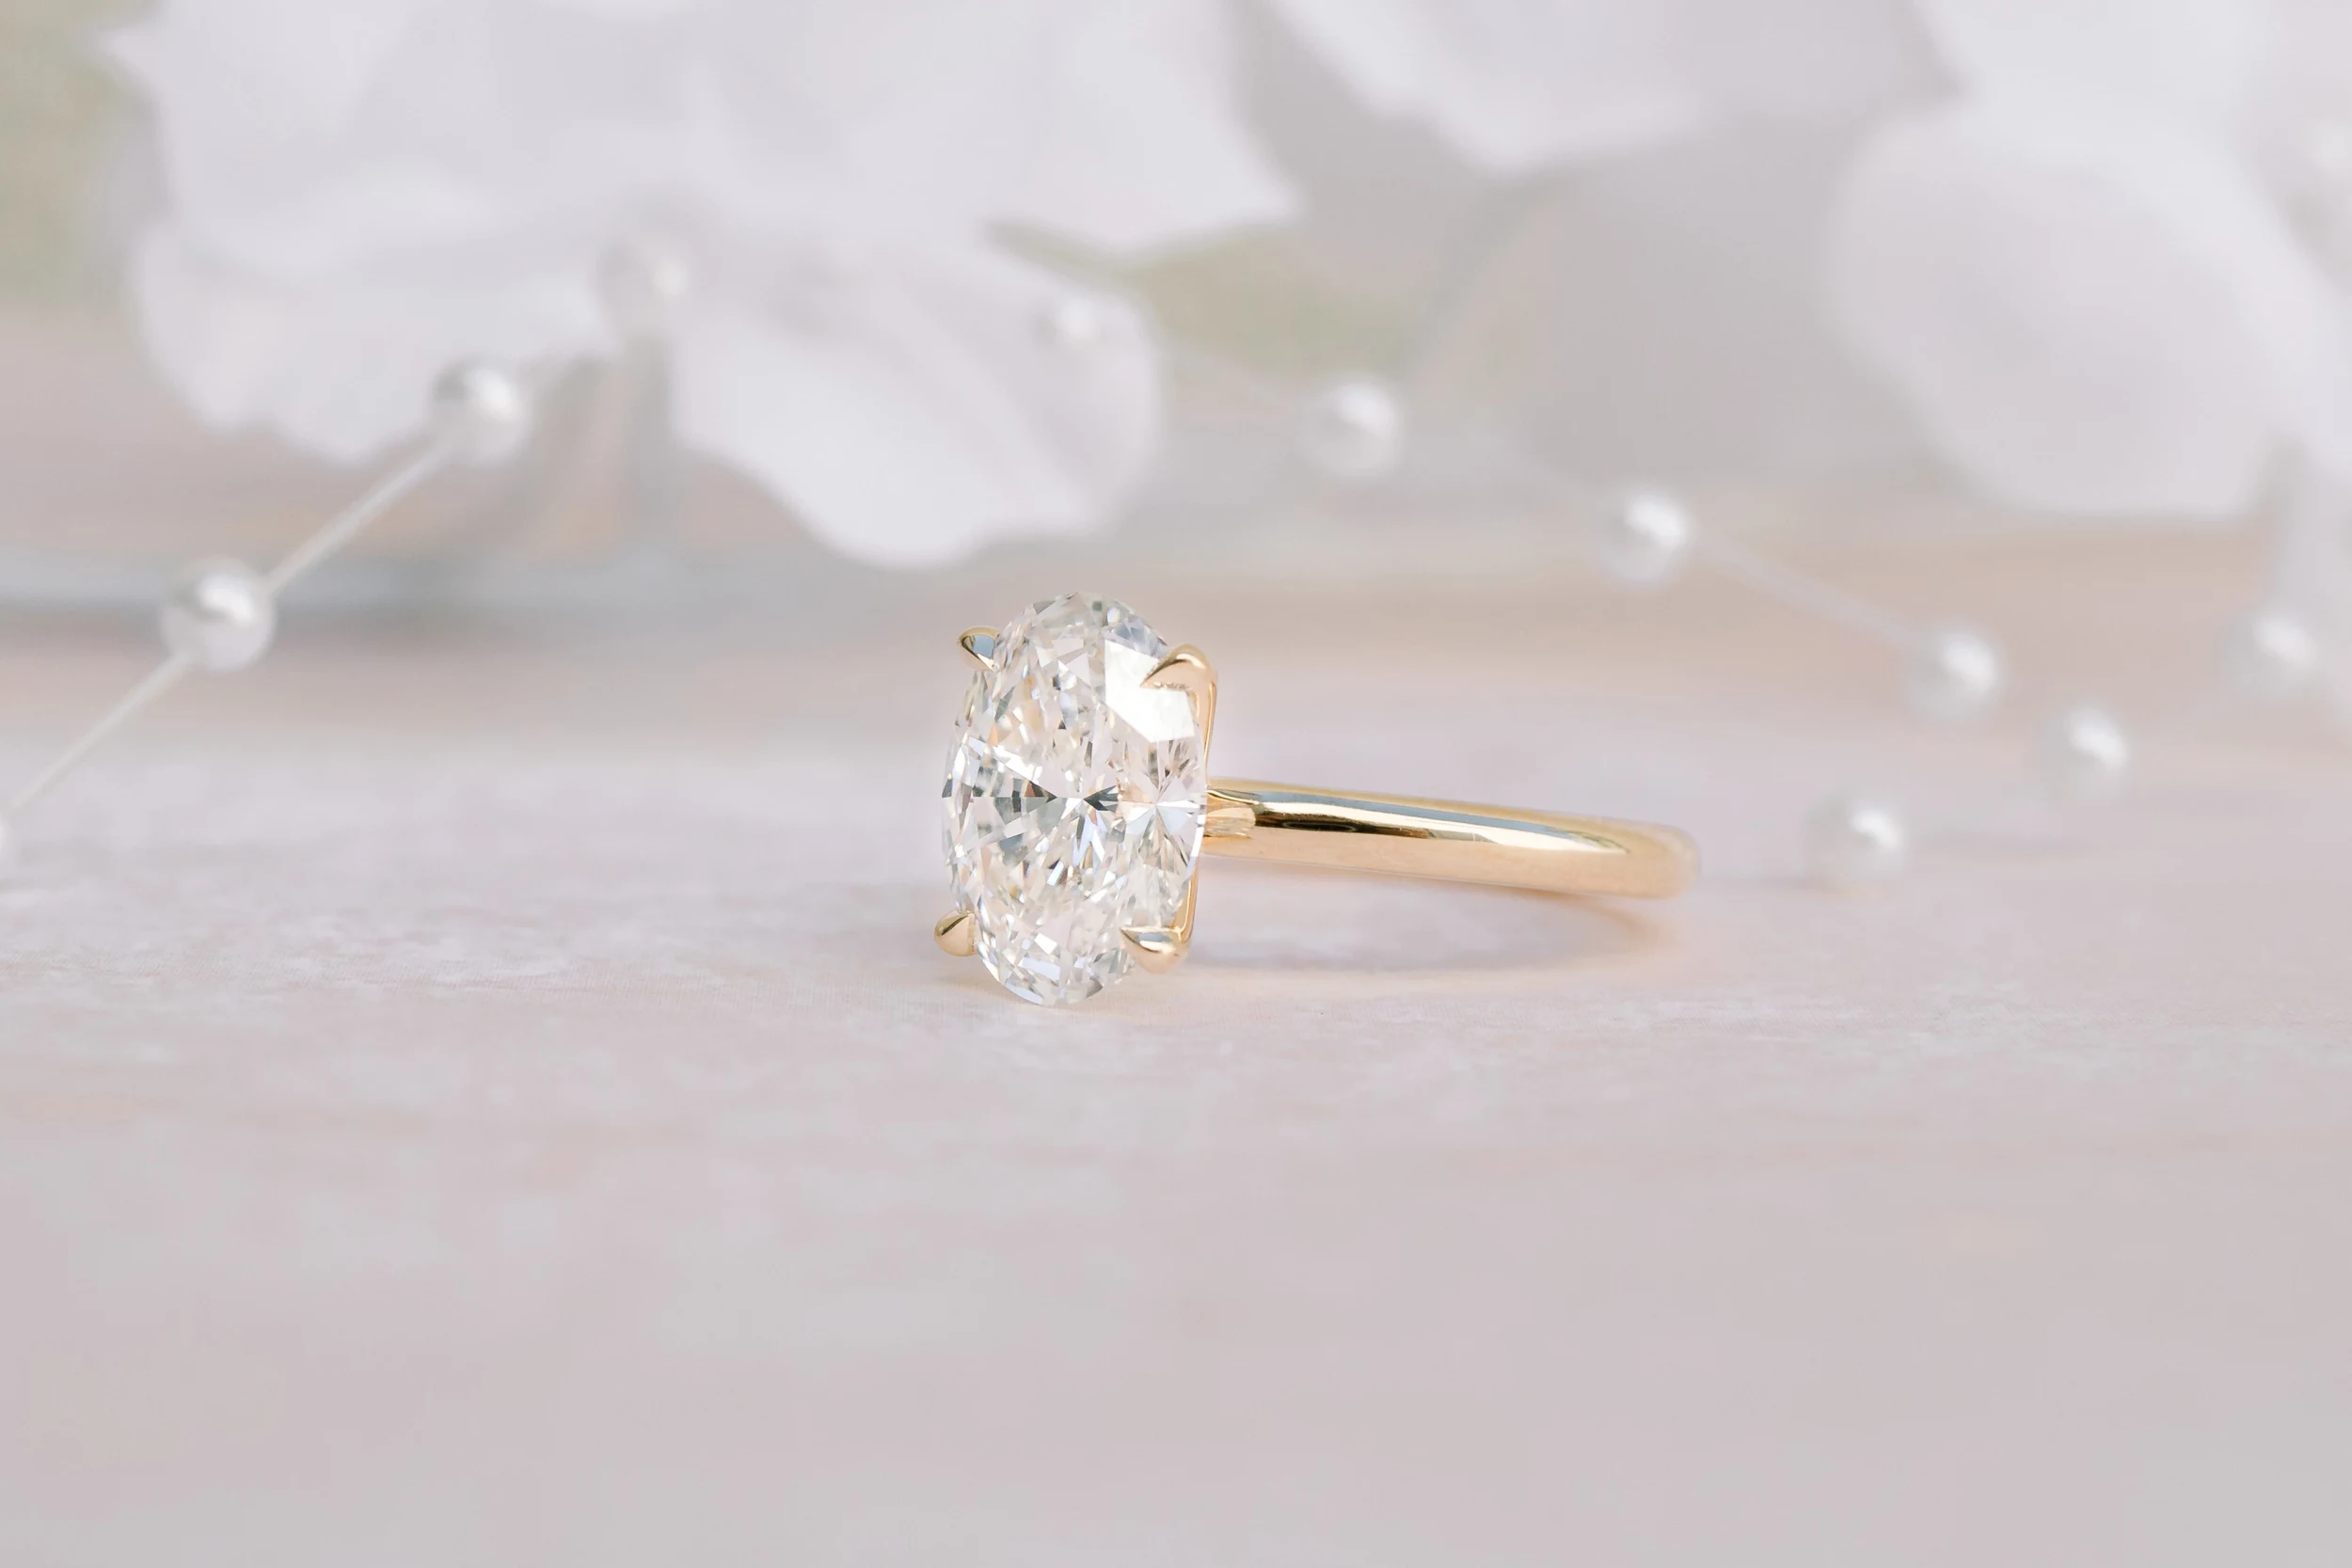 Yellow Gold Oval Classic Four Prong Solitaire Diamond Engagement Ring featuring 2.25 Carat Lab Diamonds (Side View)